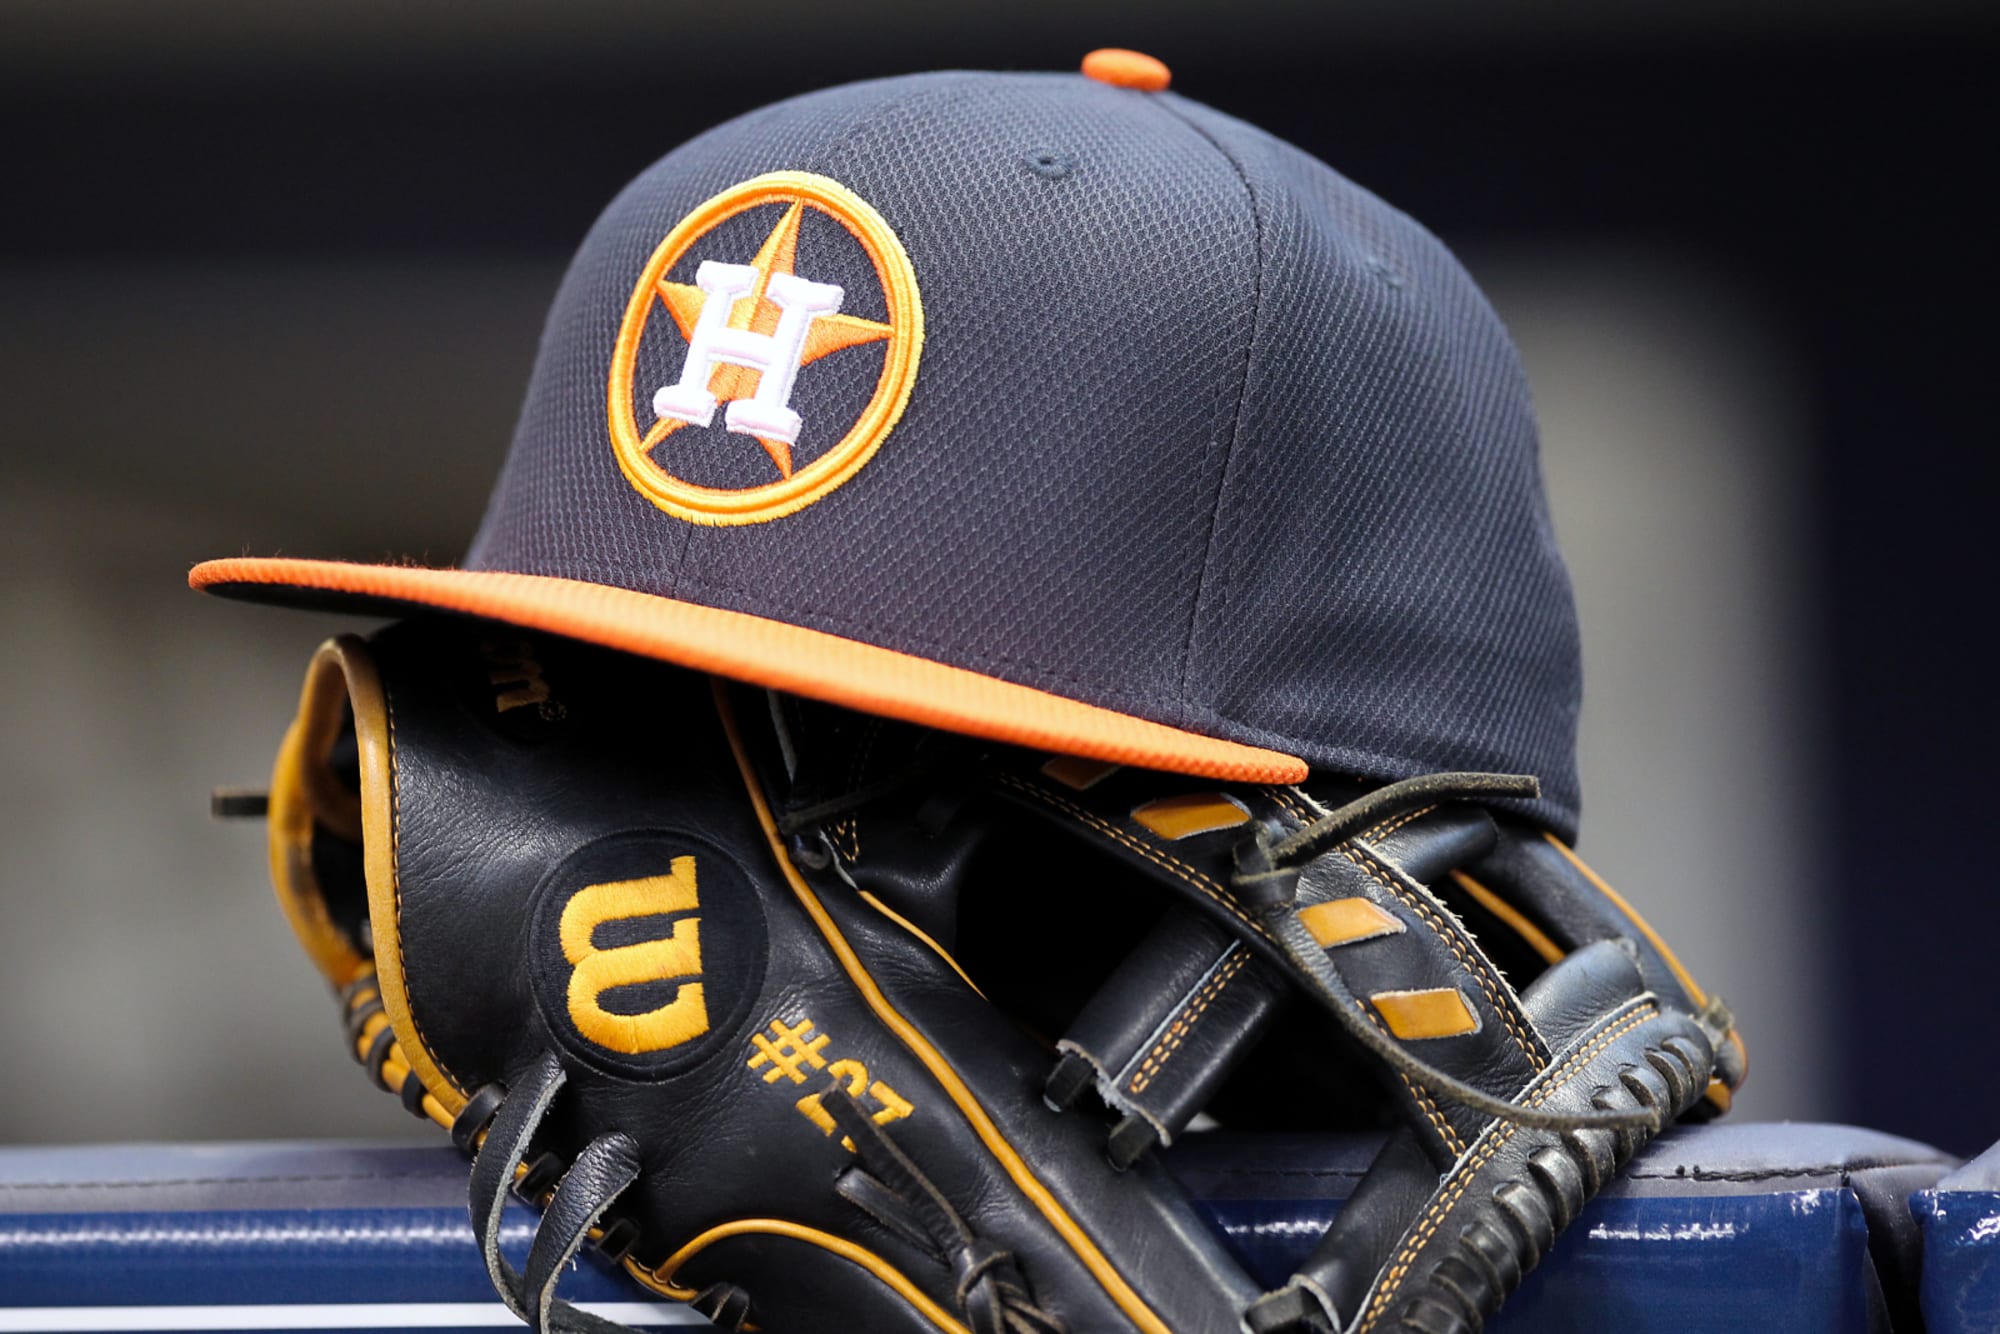 Houston Astros First round selection is the first baseman of the future